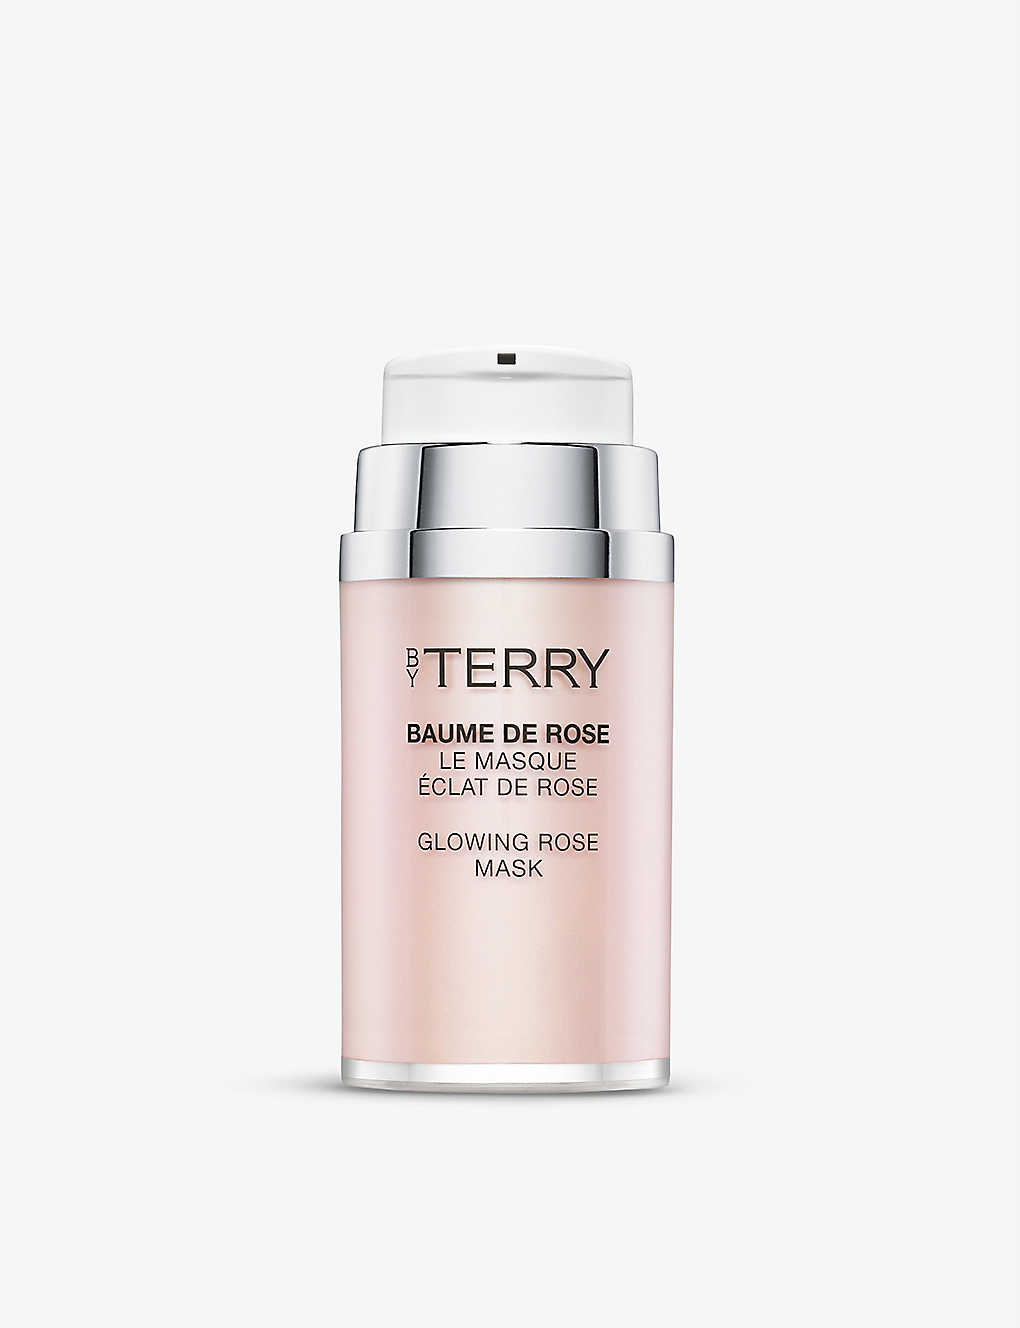 BY TERRY BAUME DE ROSE GLOWING ROSE MASK 50G,40496012